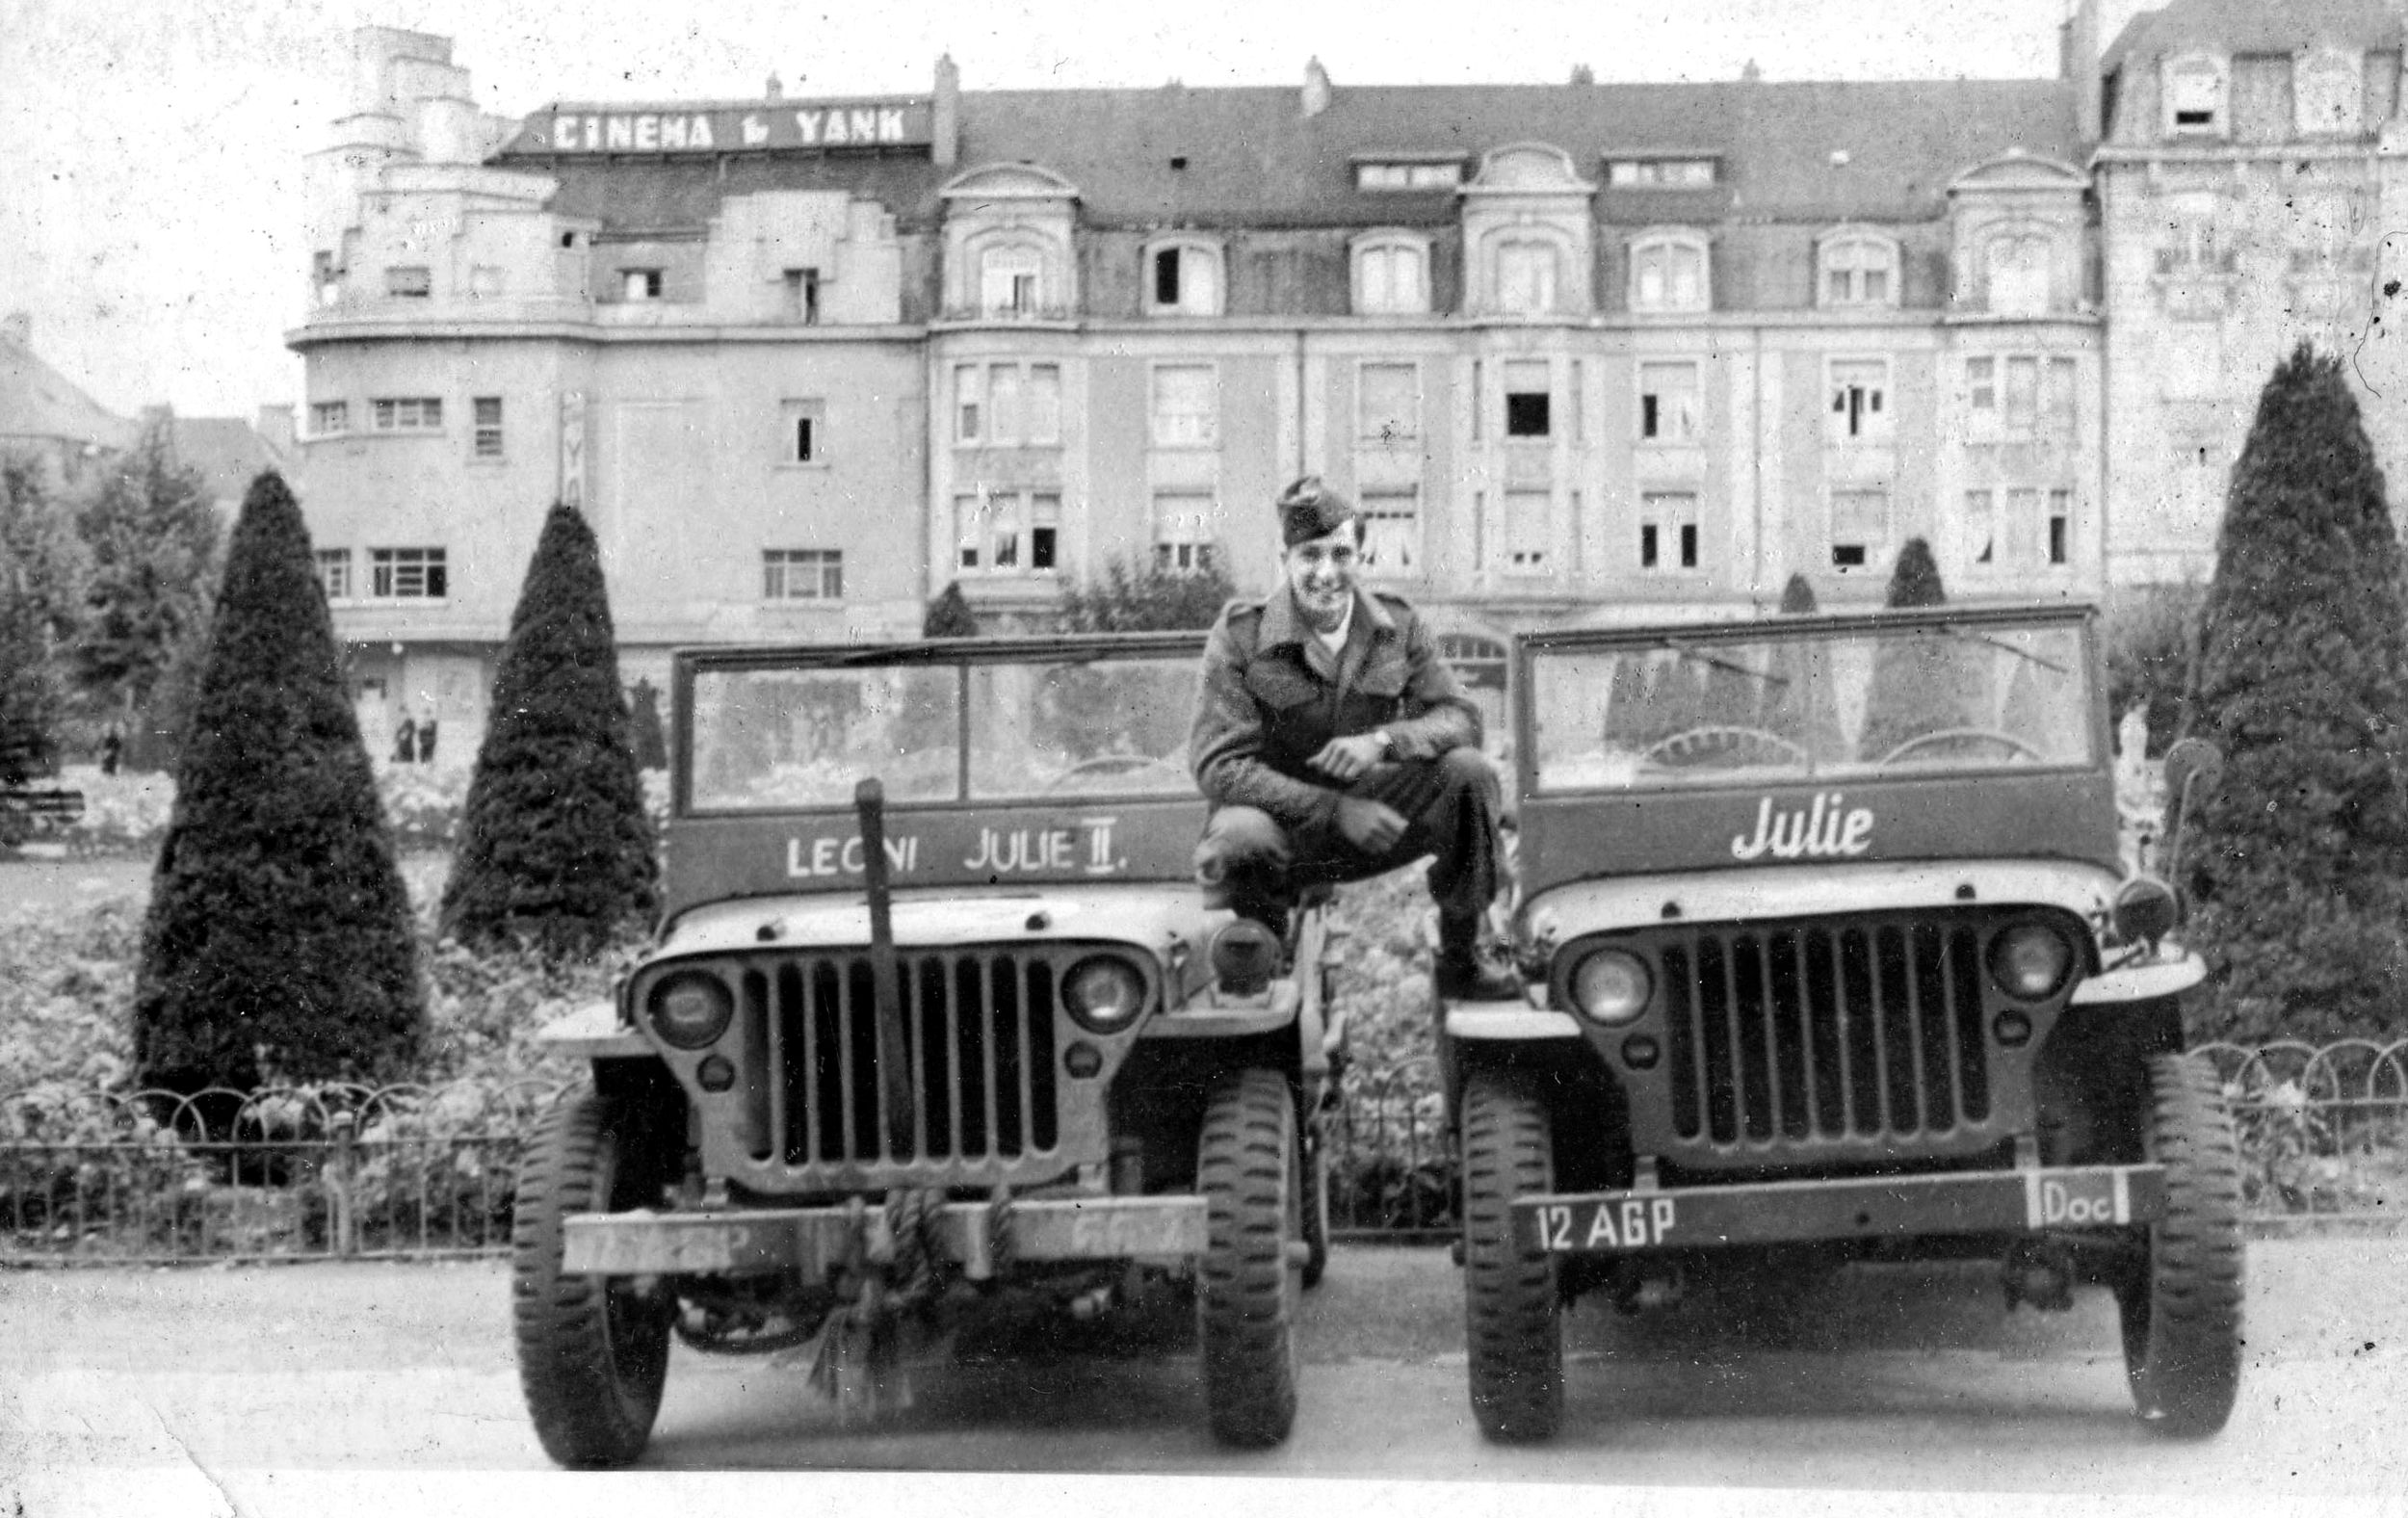 PFC Cohn straddles two jeeps used by Prisoner of War Team 66. He served under General Omar Bradley’s 12th Army Group, which can be identified on the right jeep’s front bumper.